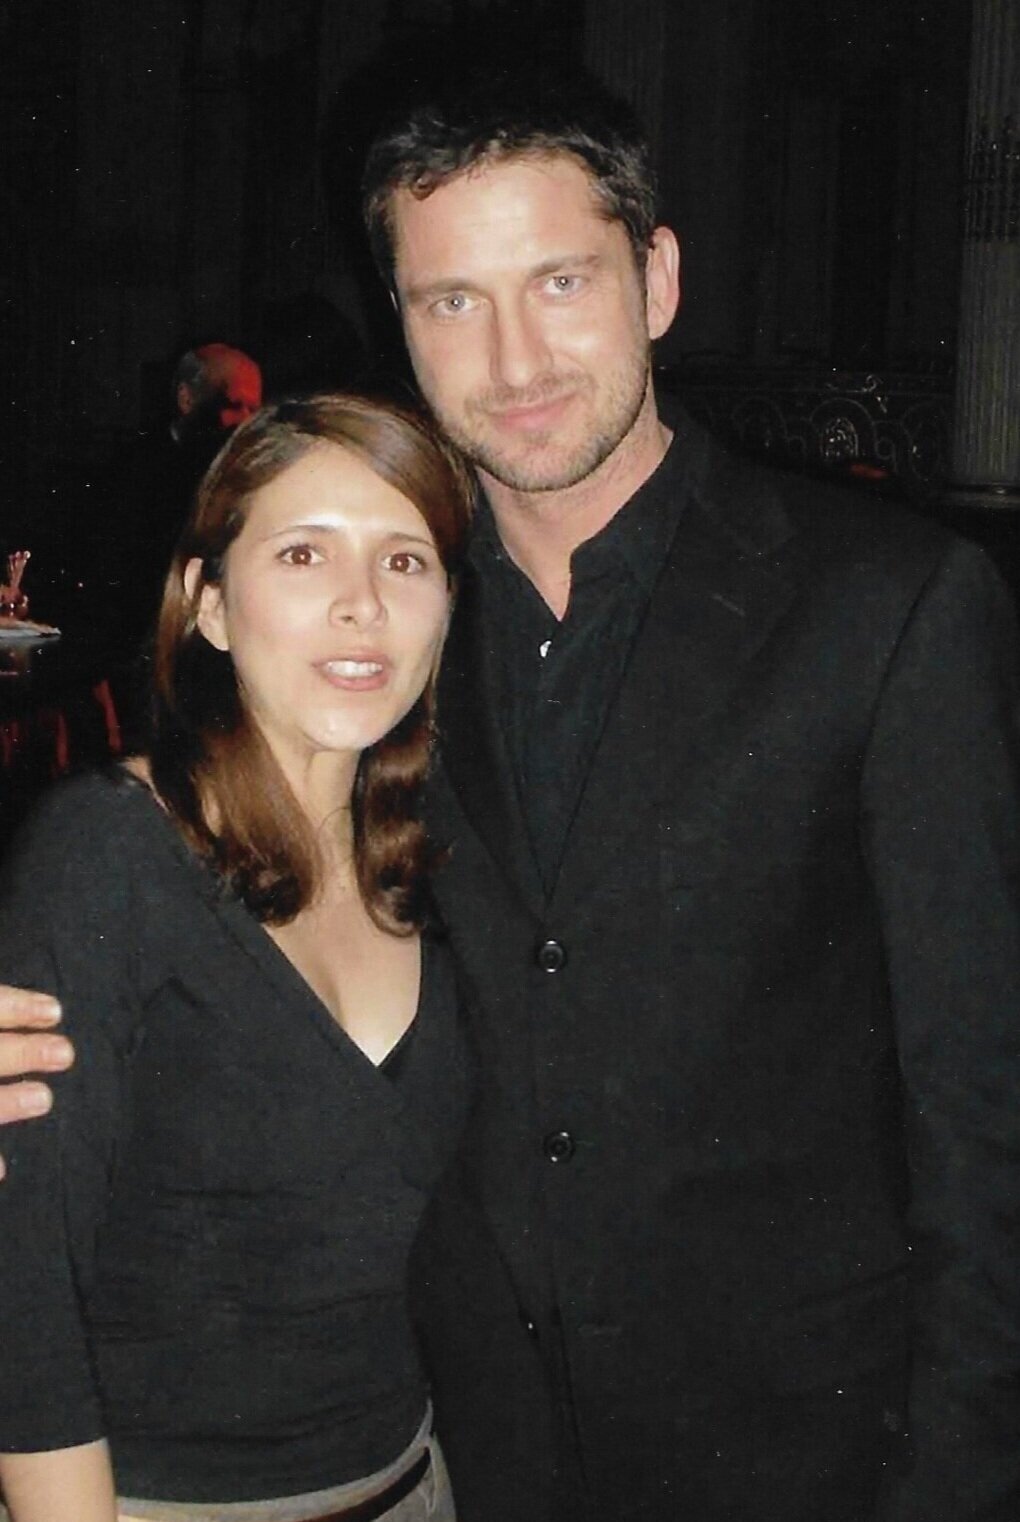 Ana Cuadra with actor Gerard Butler at an event